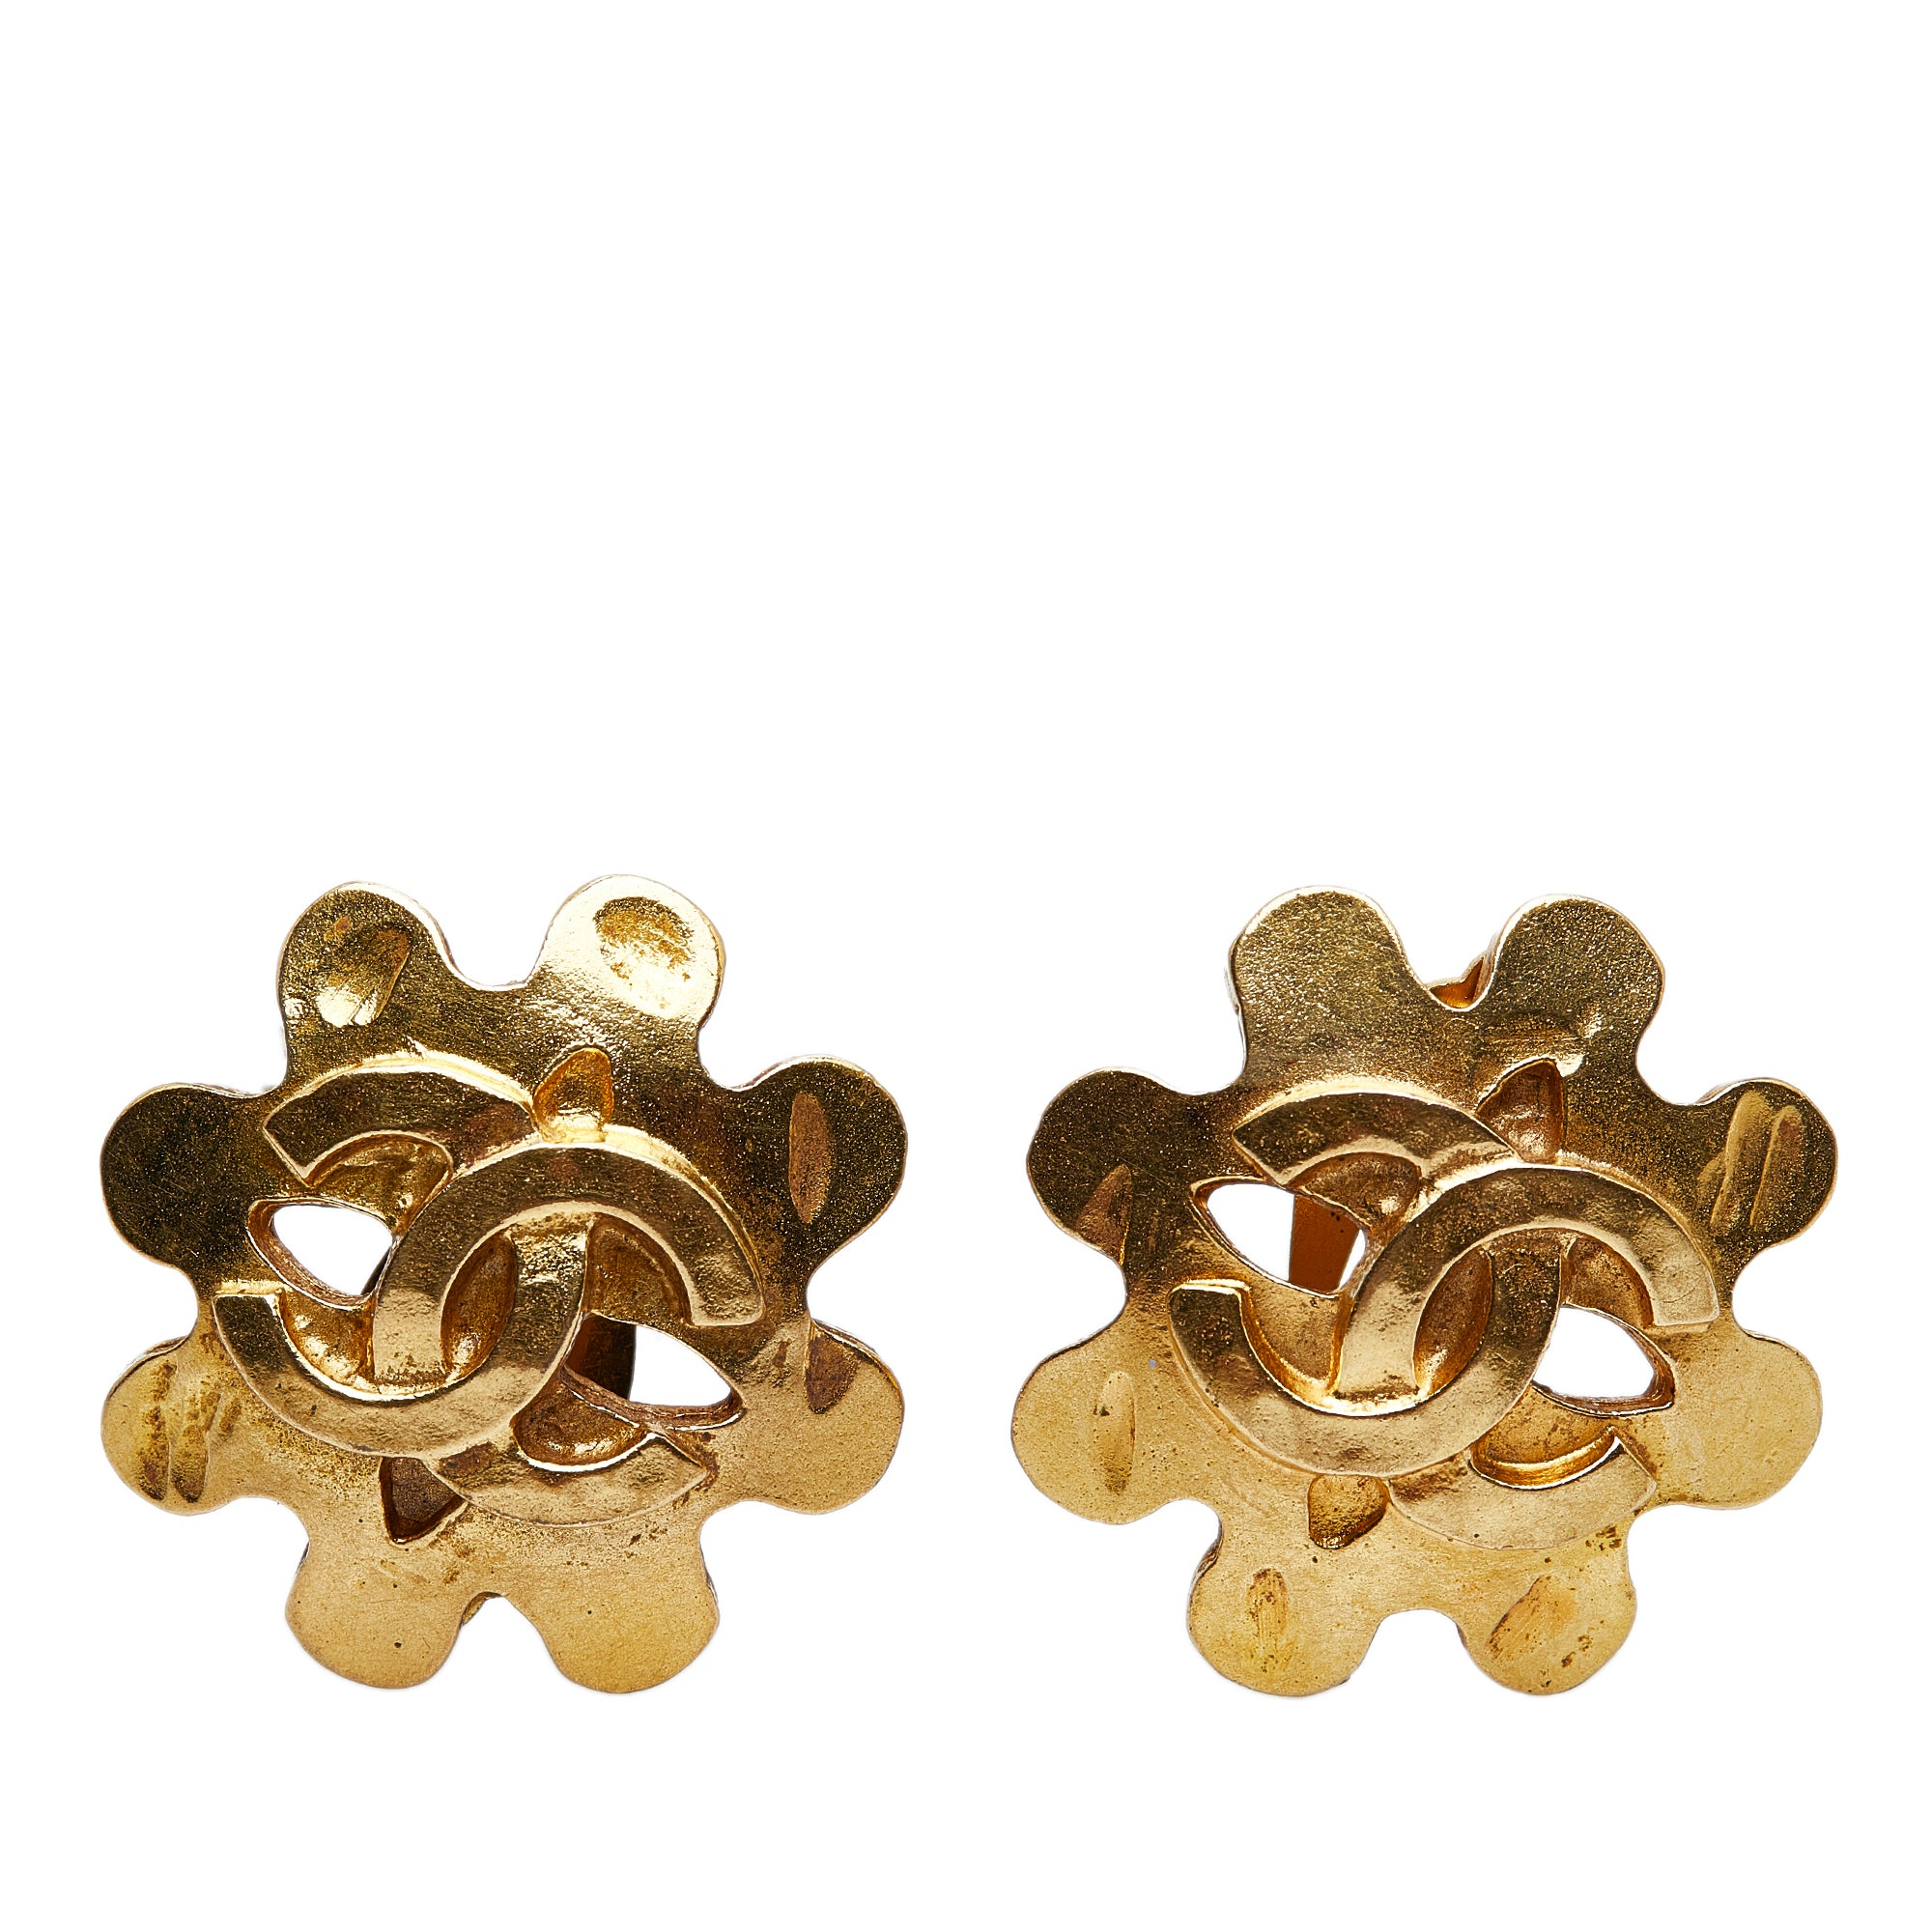 Vintage Gold, Silver Chanel Earrings for Sale, Antique Chanel Earrings  Online Auction